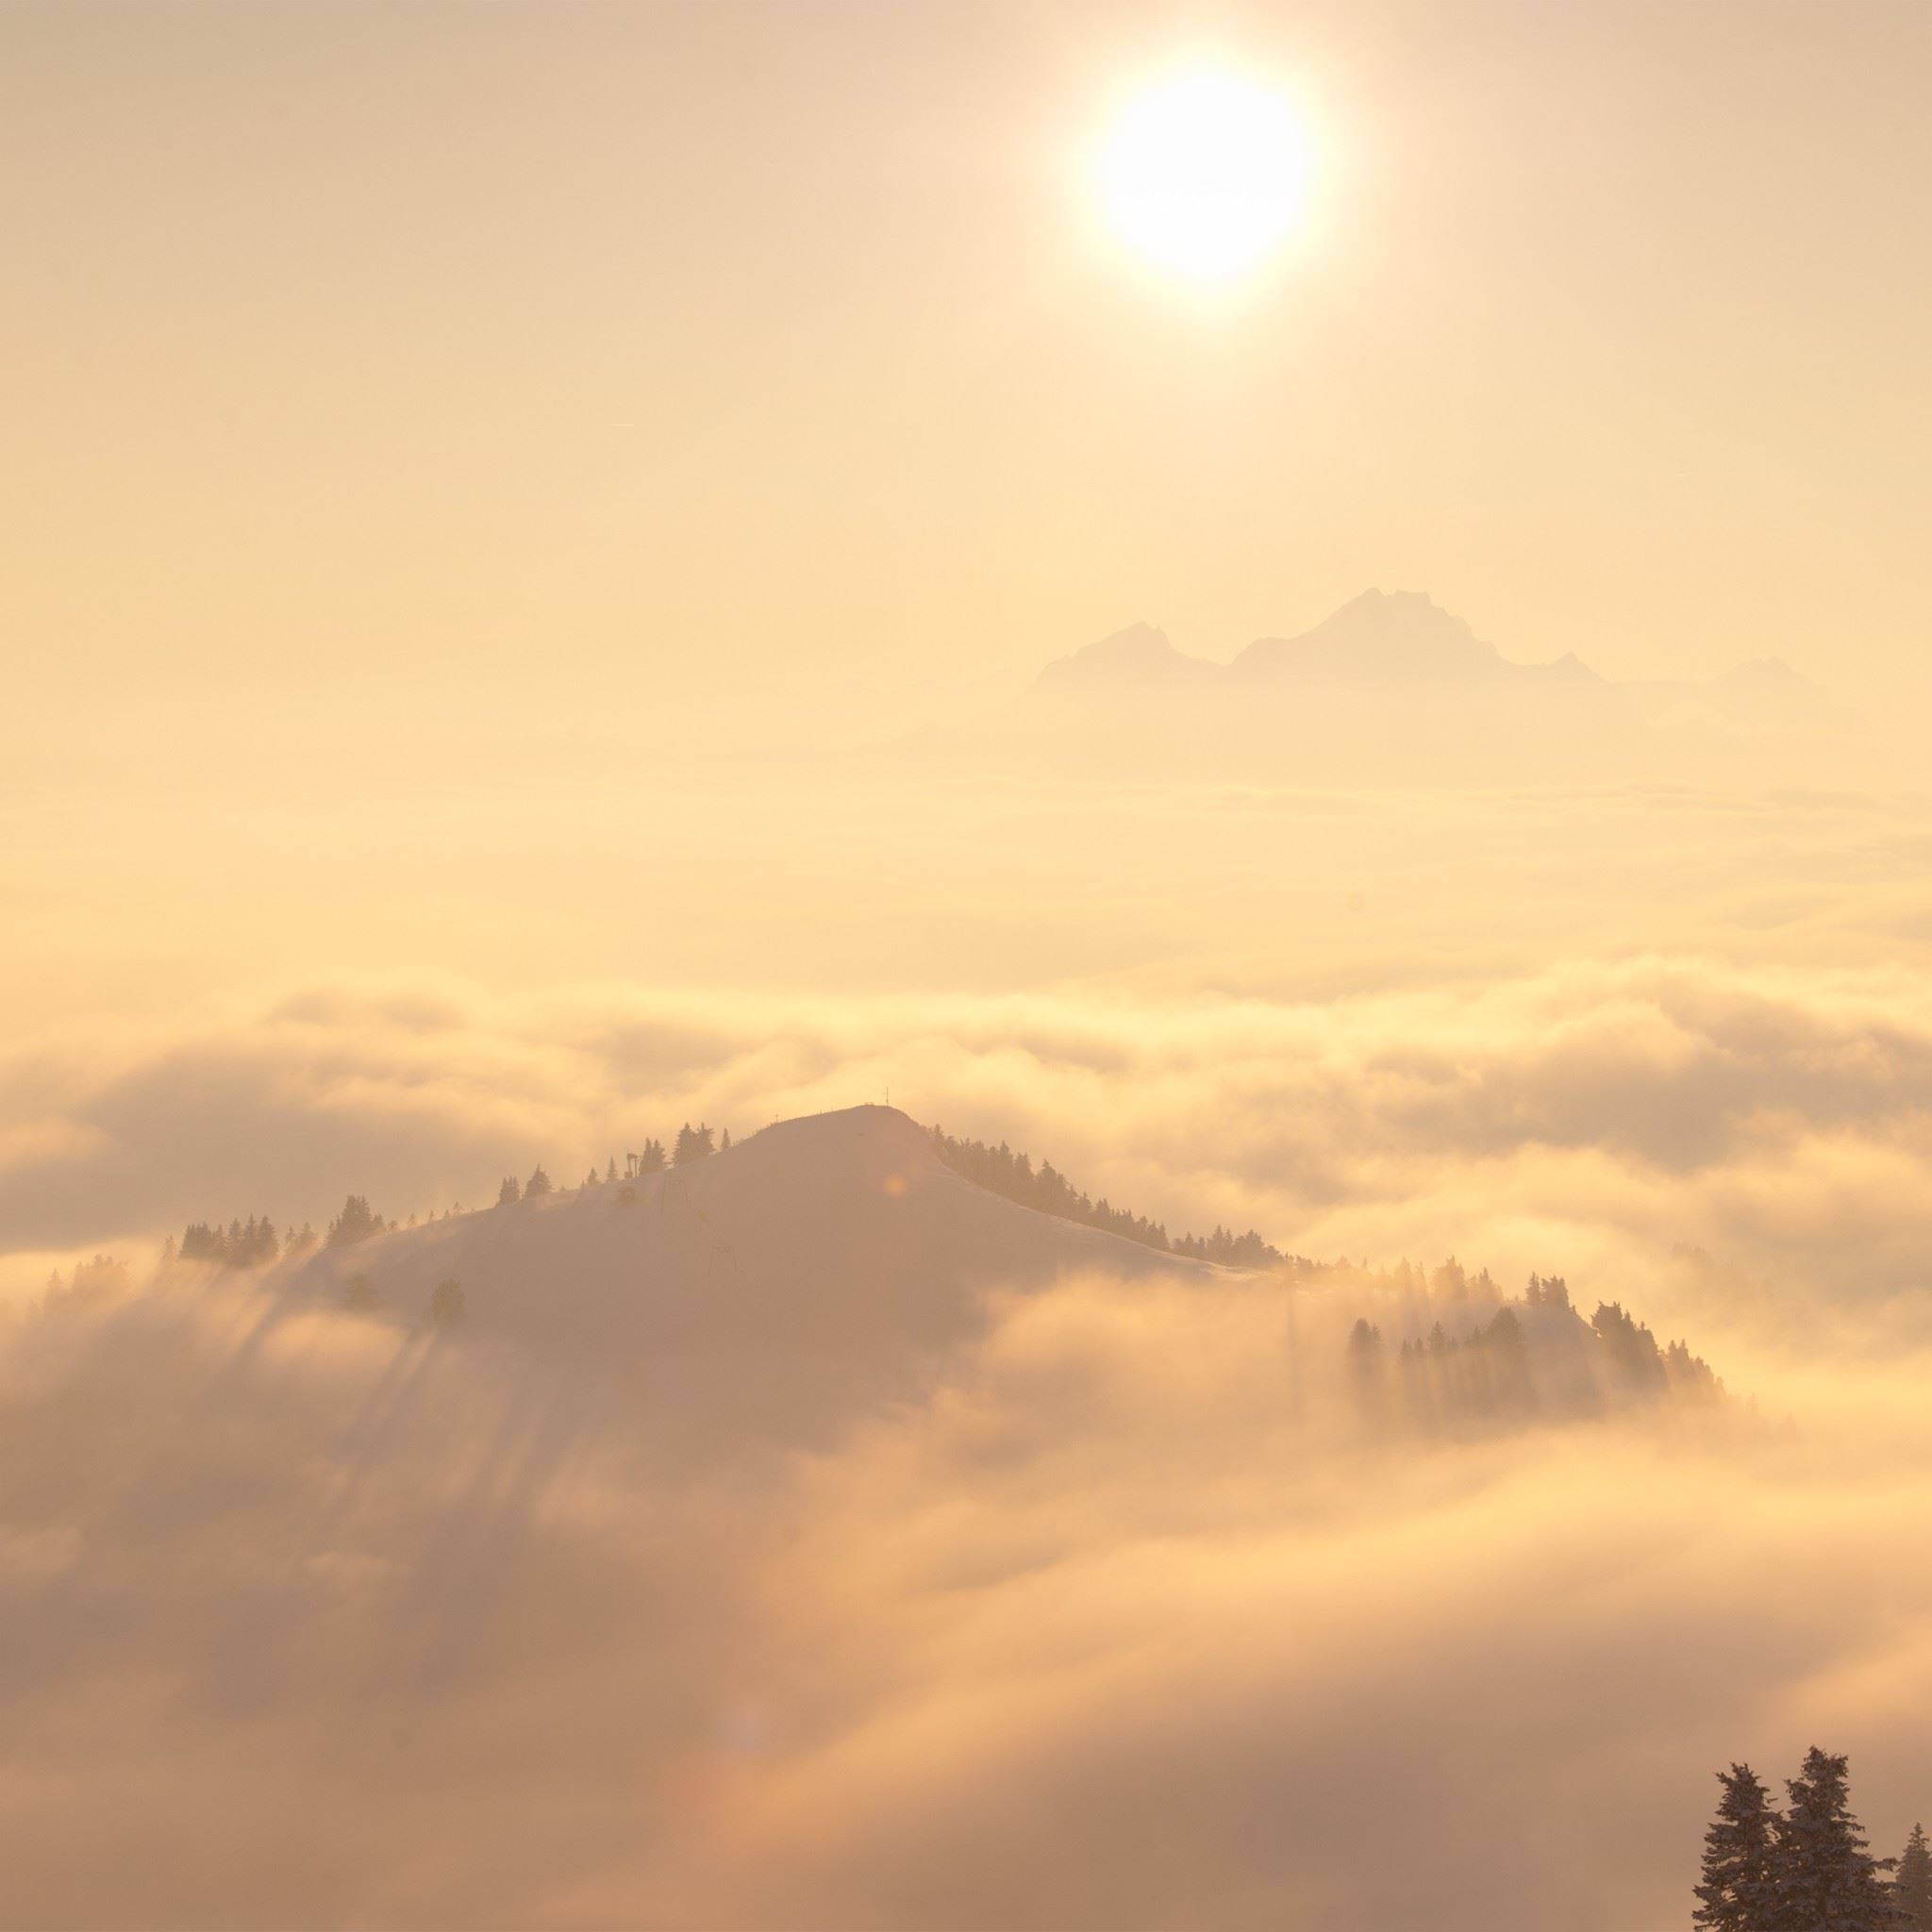 Sunrise Over Thick Cloudy Mountains Landscape iPad Air wallpaper 